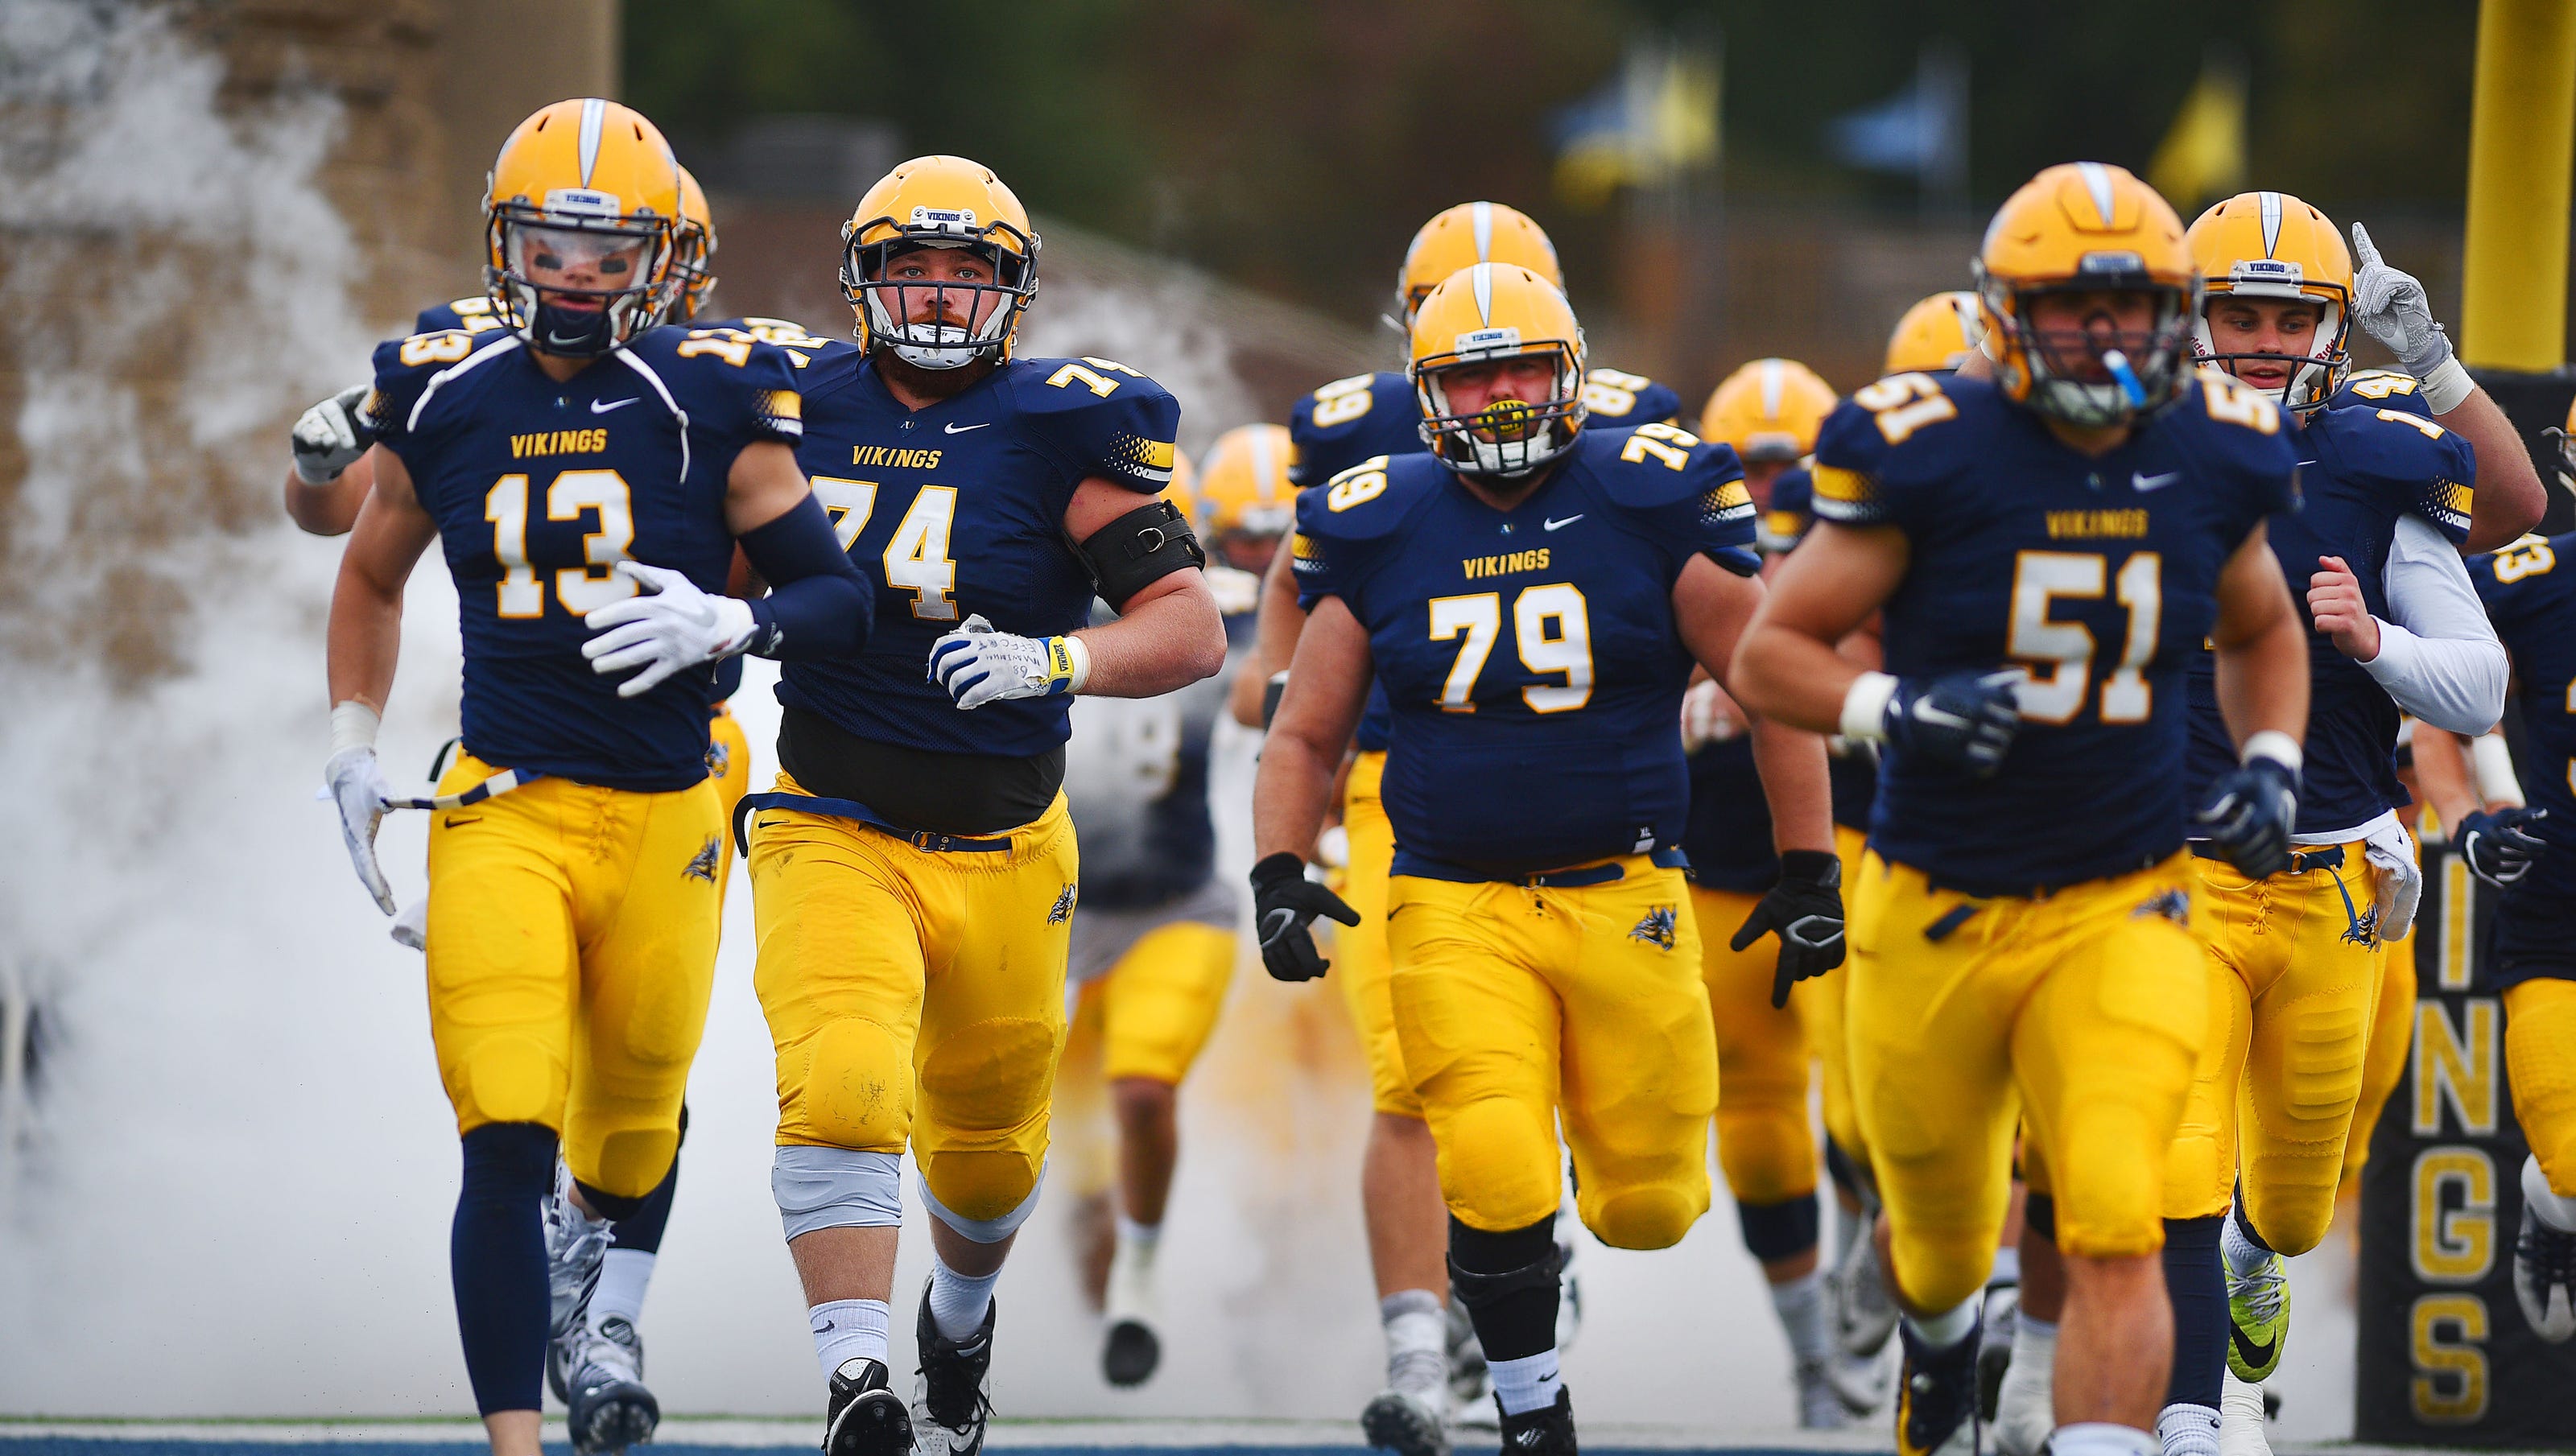 Augustana football offensive line: Vikings want to get even better